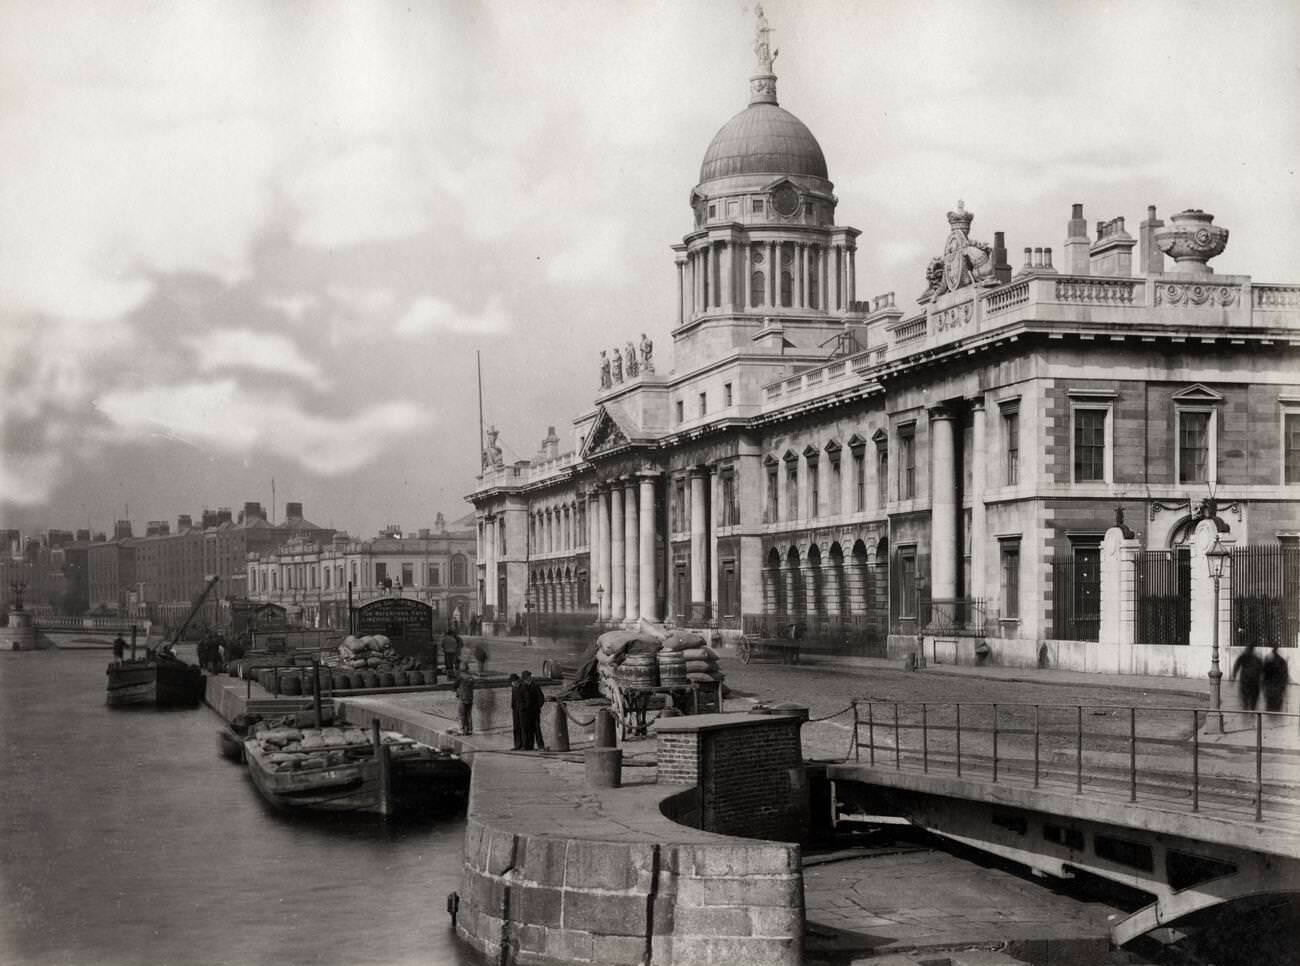 Barges for freight tied up outside the Customs House on the River Liffey, Dublin.